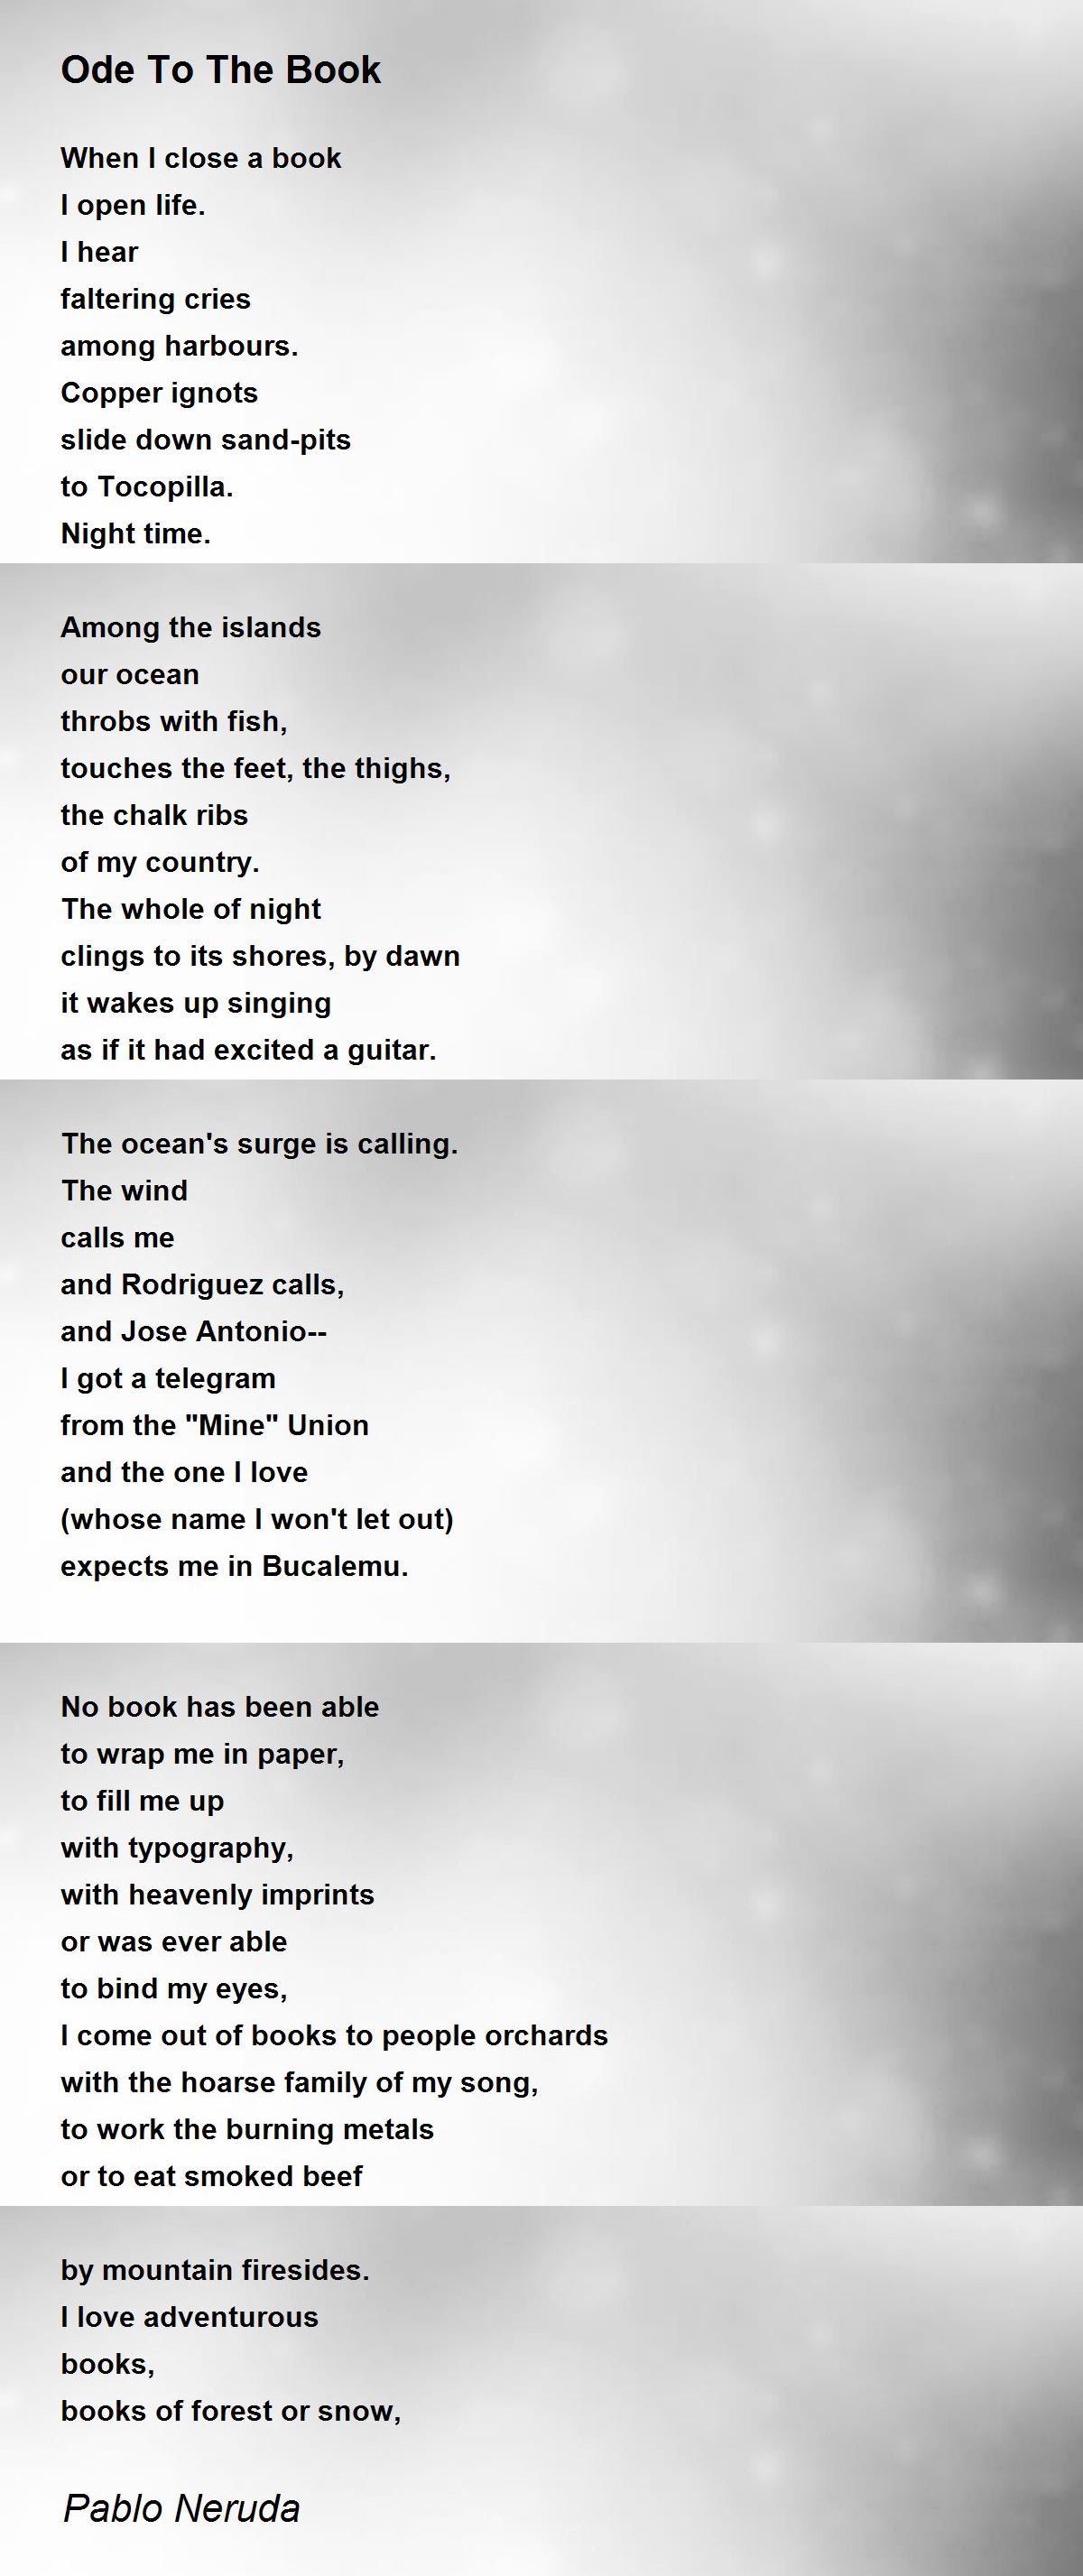 Ode To The Book Poem by Pablo Neruda - Poem Hunter